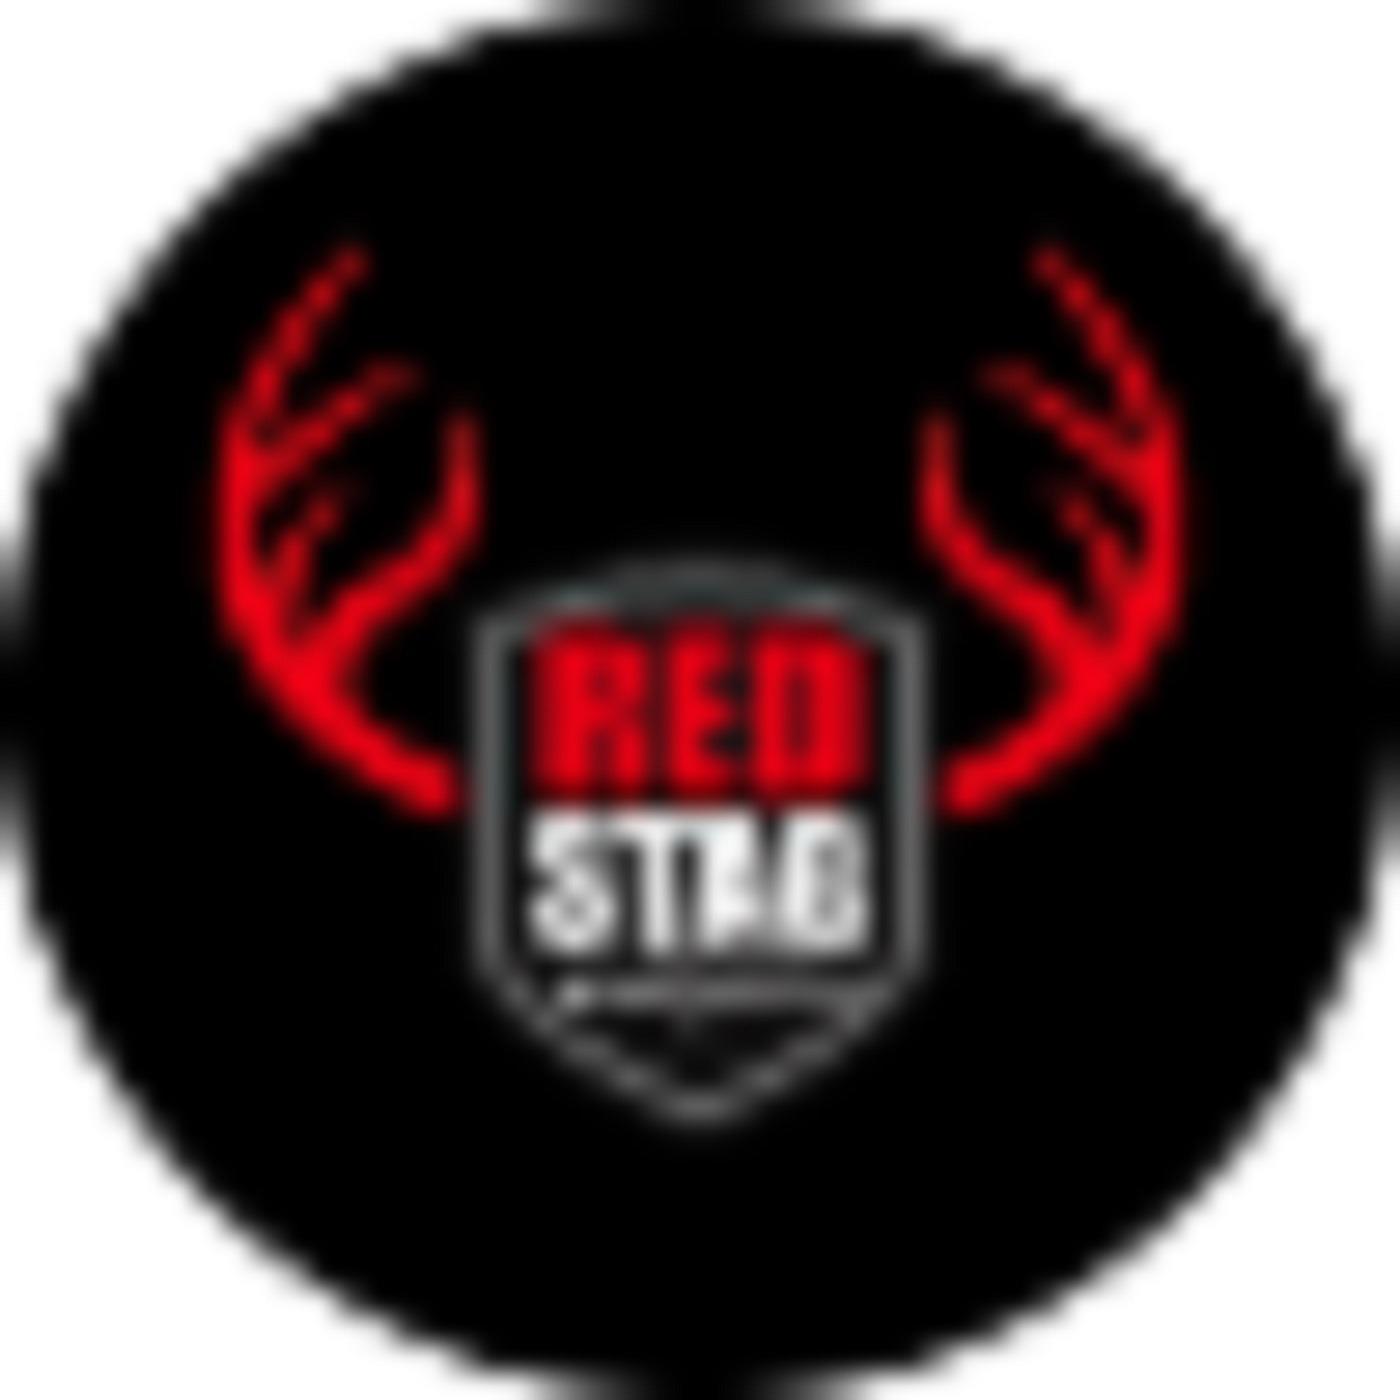 Red Stag Casino Review – An Online Site to Earn Money